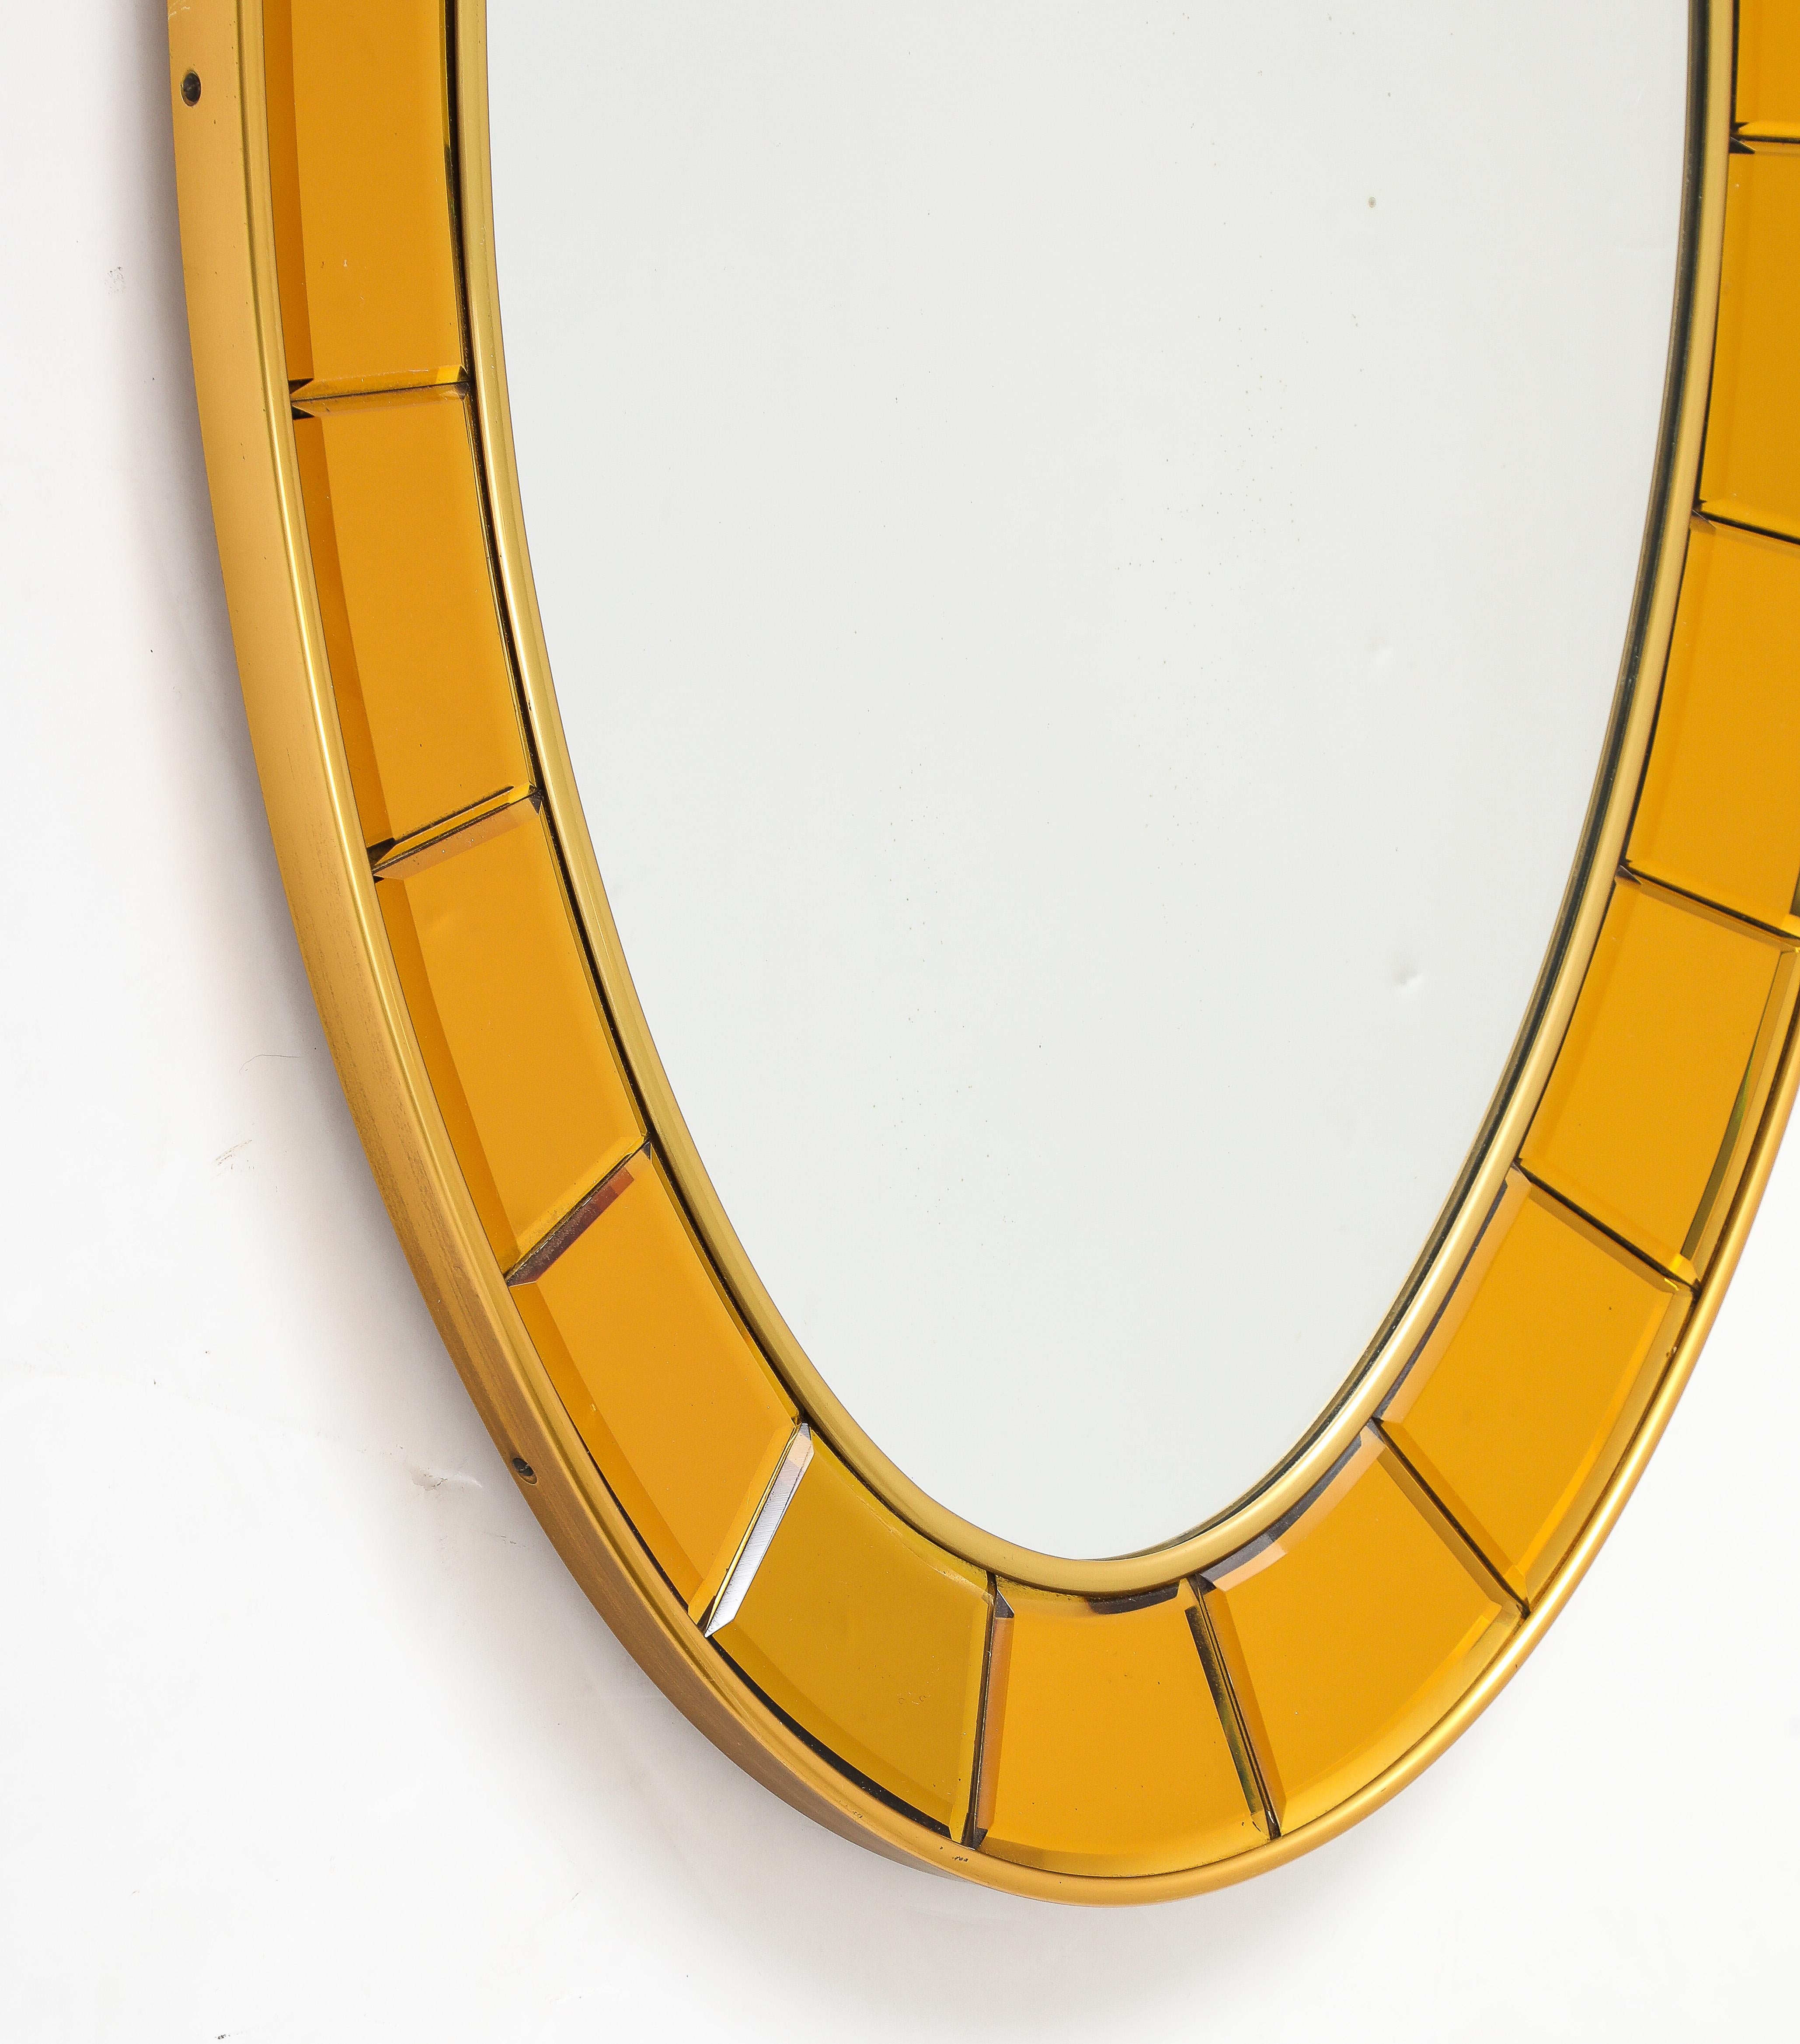 Cristal Art Oval Gold Hand-Cut Beveled Glass Mirror Model 2727, 1950s For Sale 6